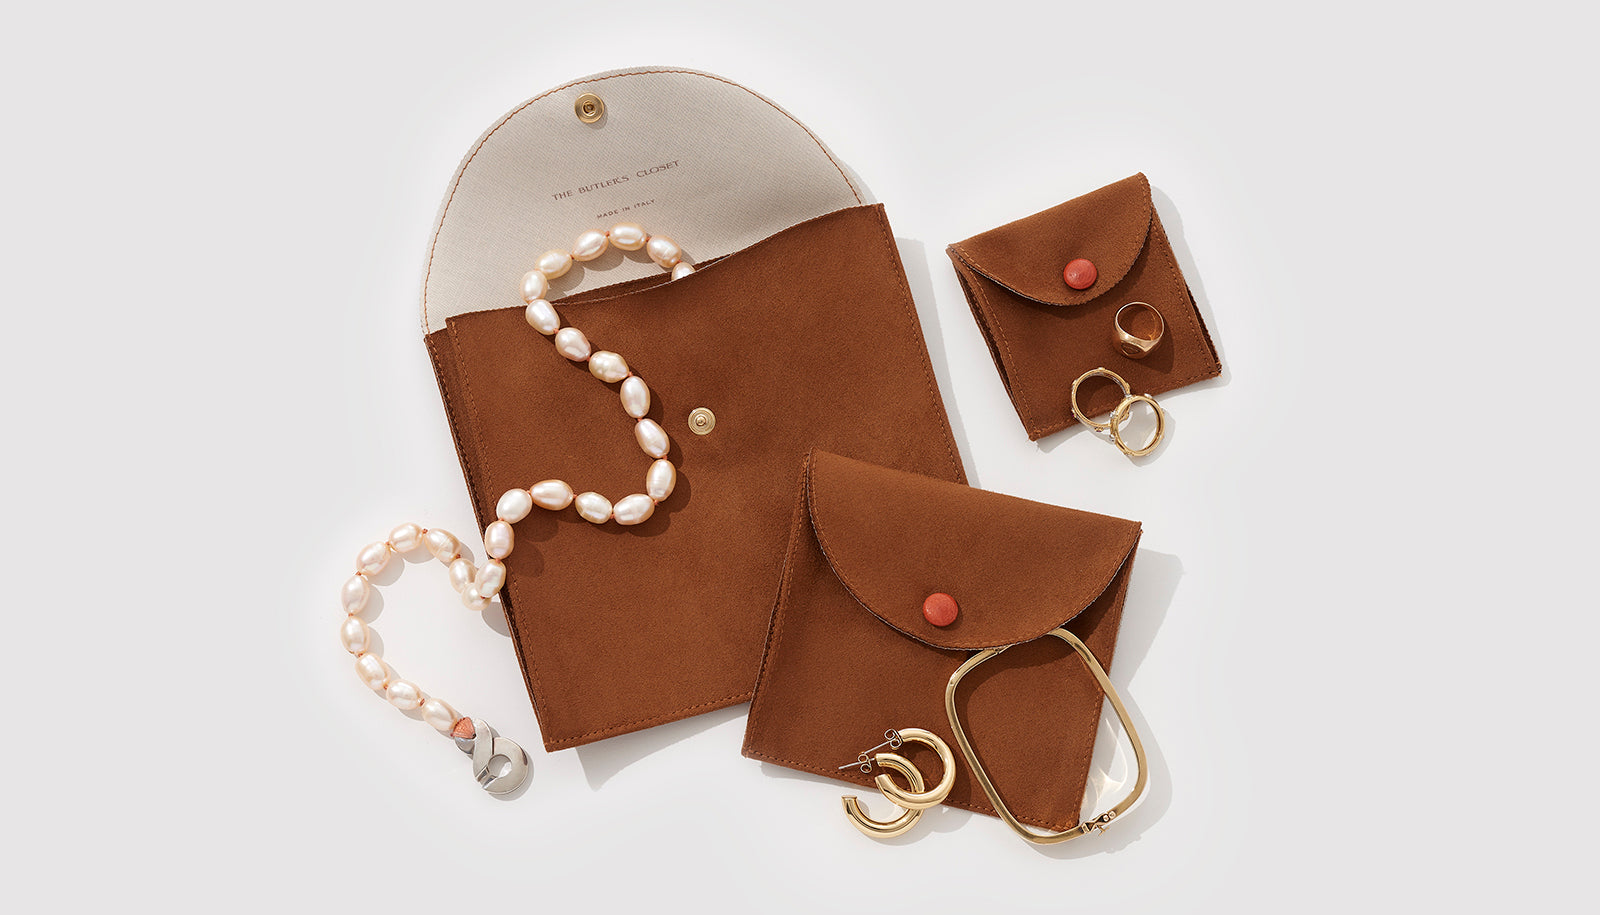 Three Elegant Italian Suede Jewelry Pouches Of Different Sizes With A Necklace, Some Earrings And Some Rings On Top Of Them